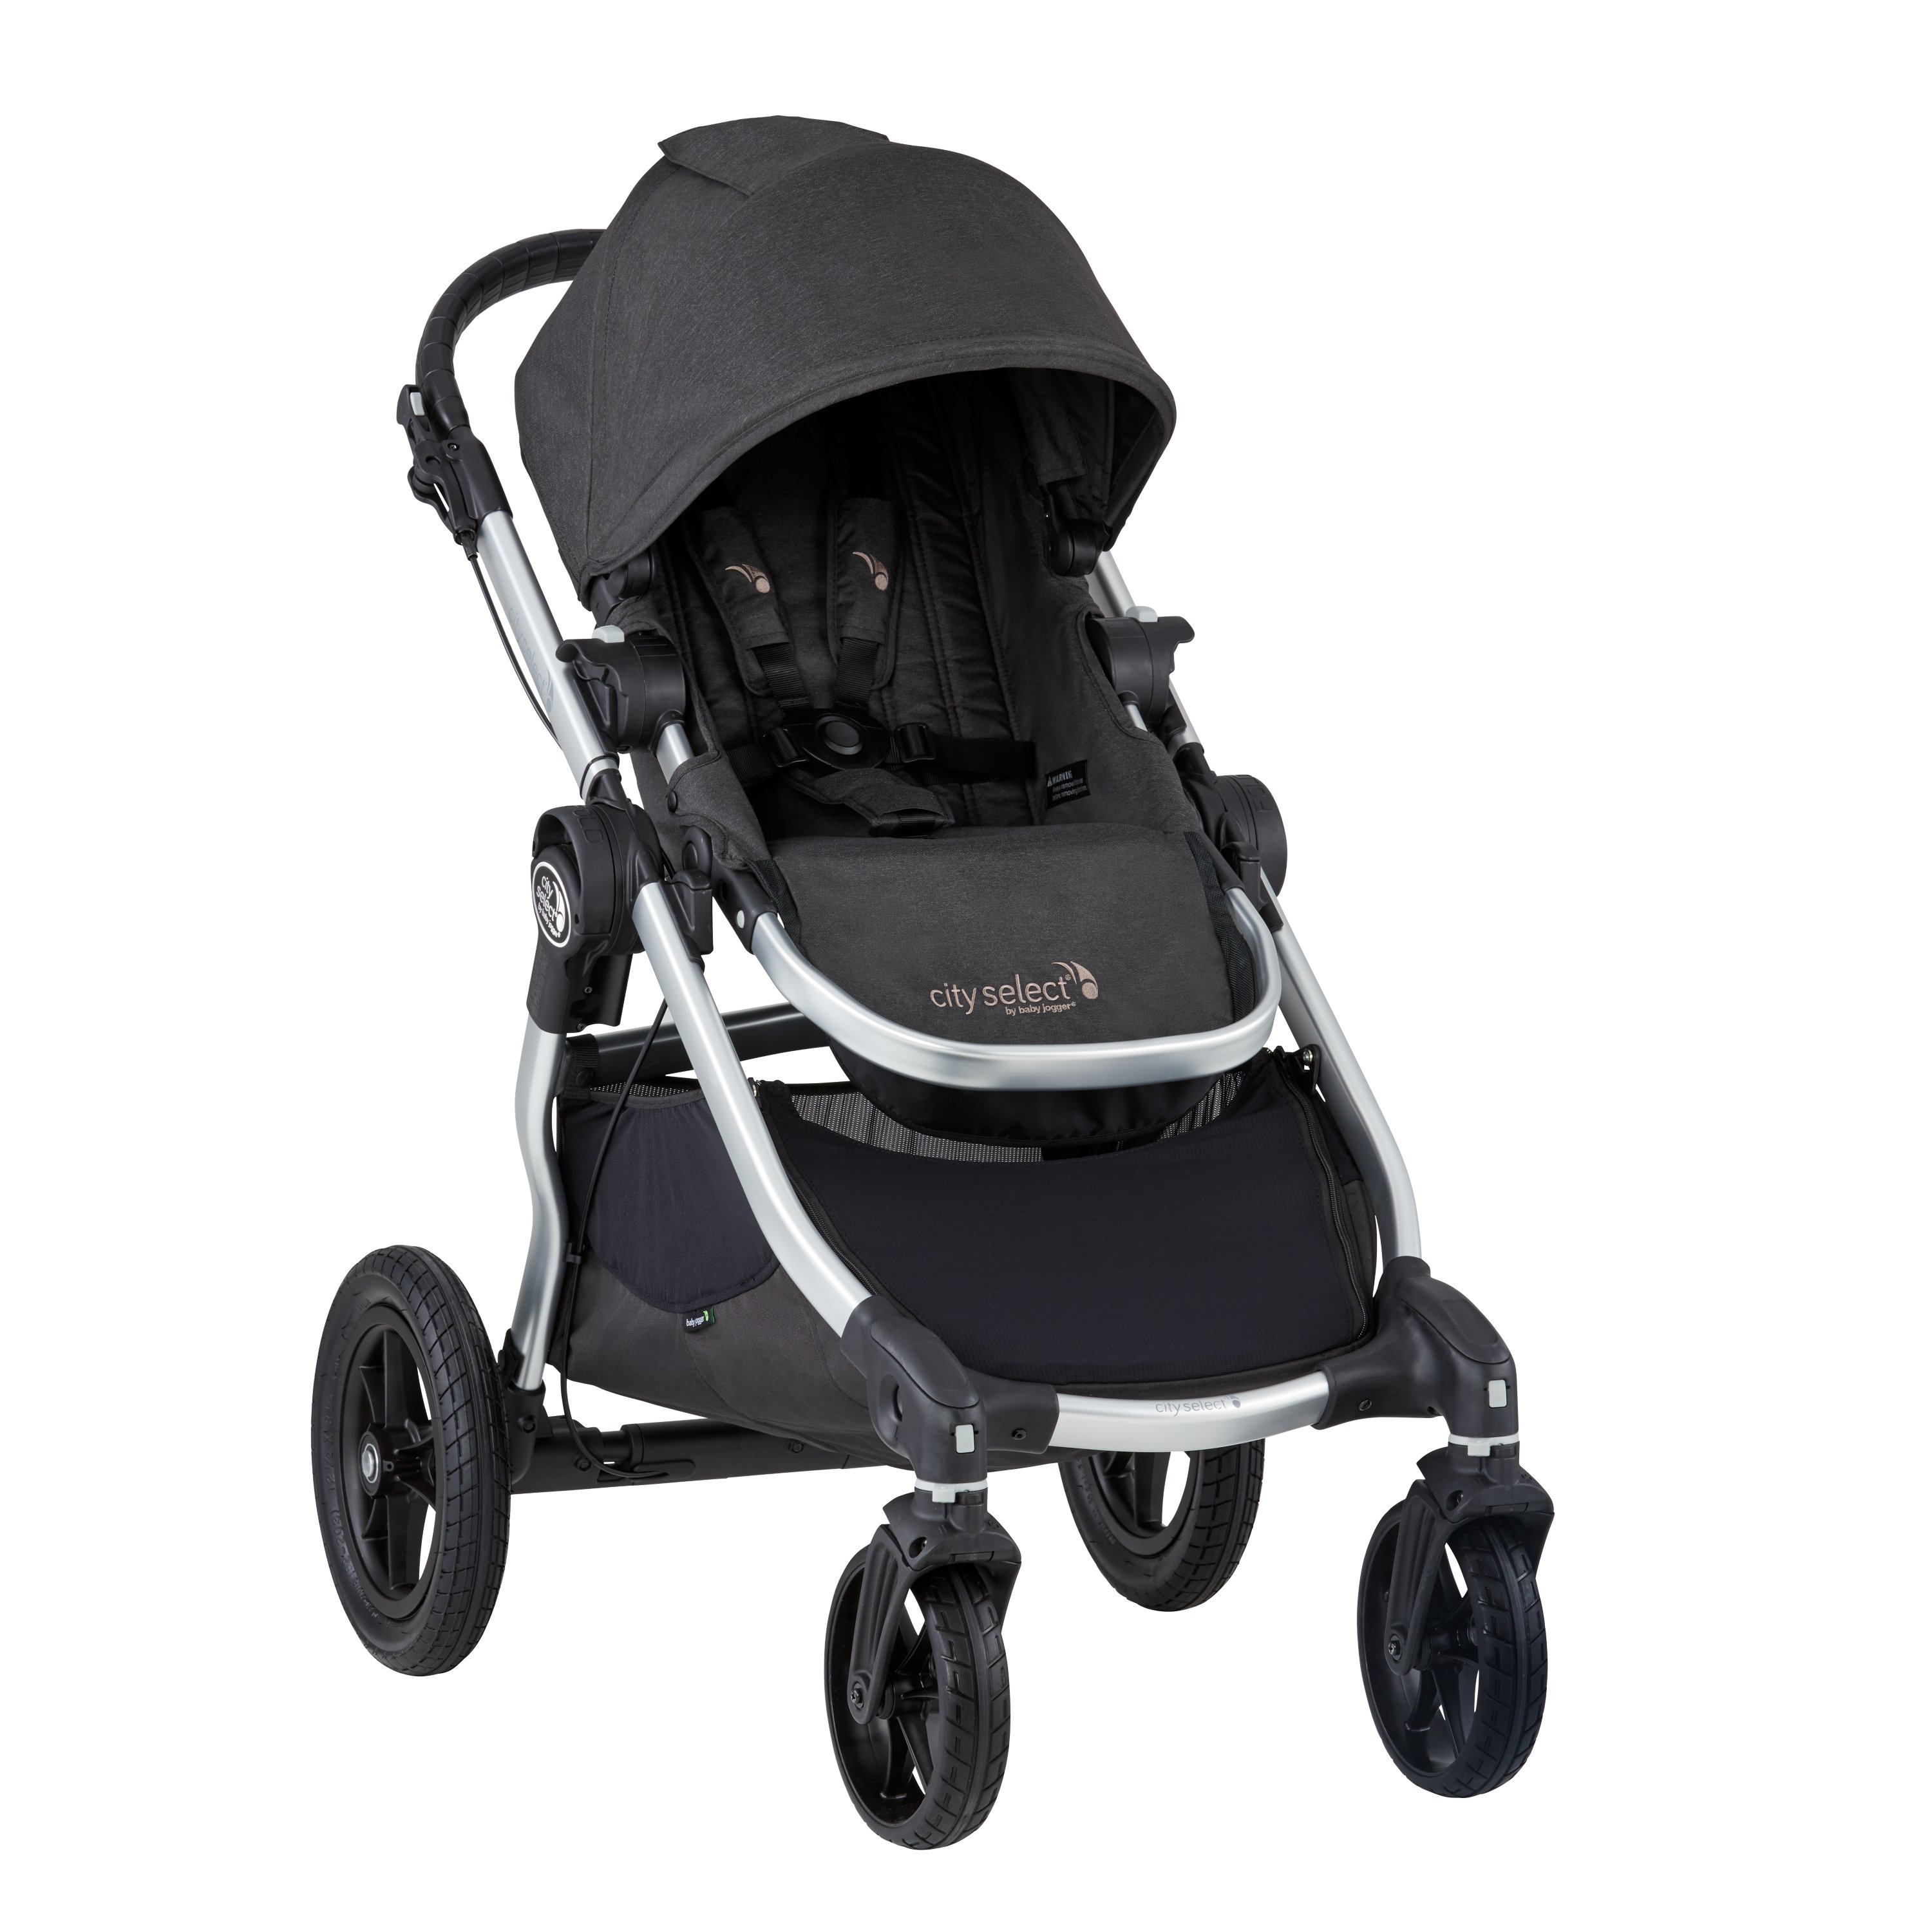 Baby Jogger city select® Stroller 